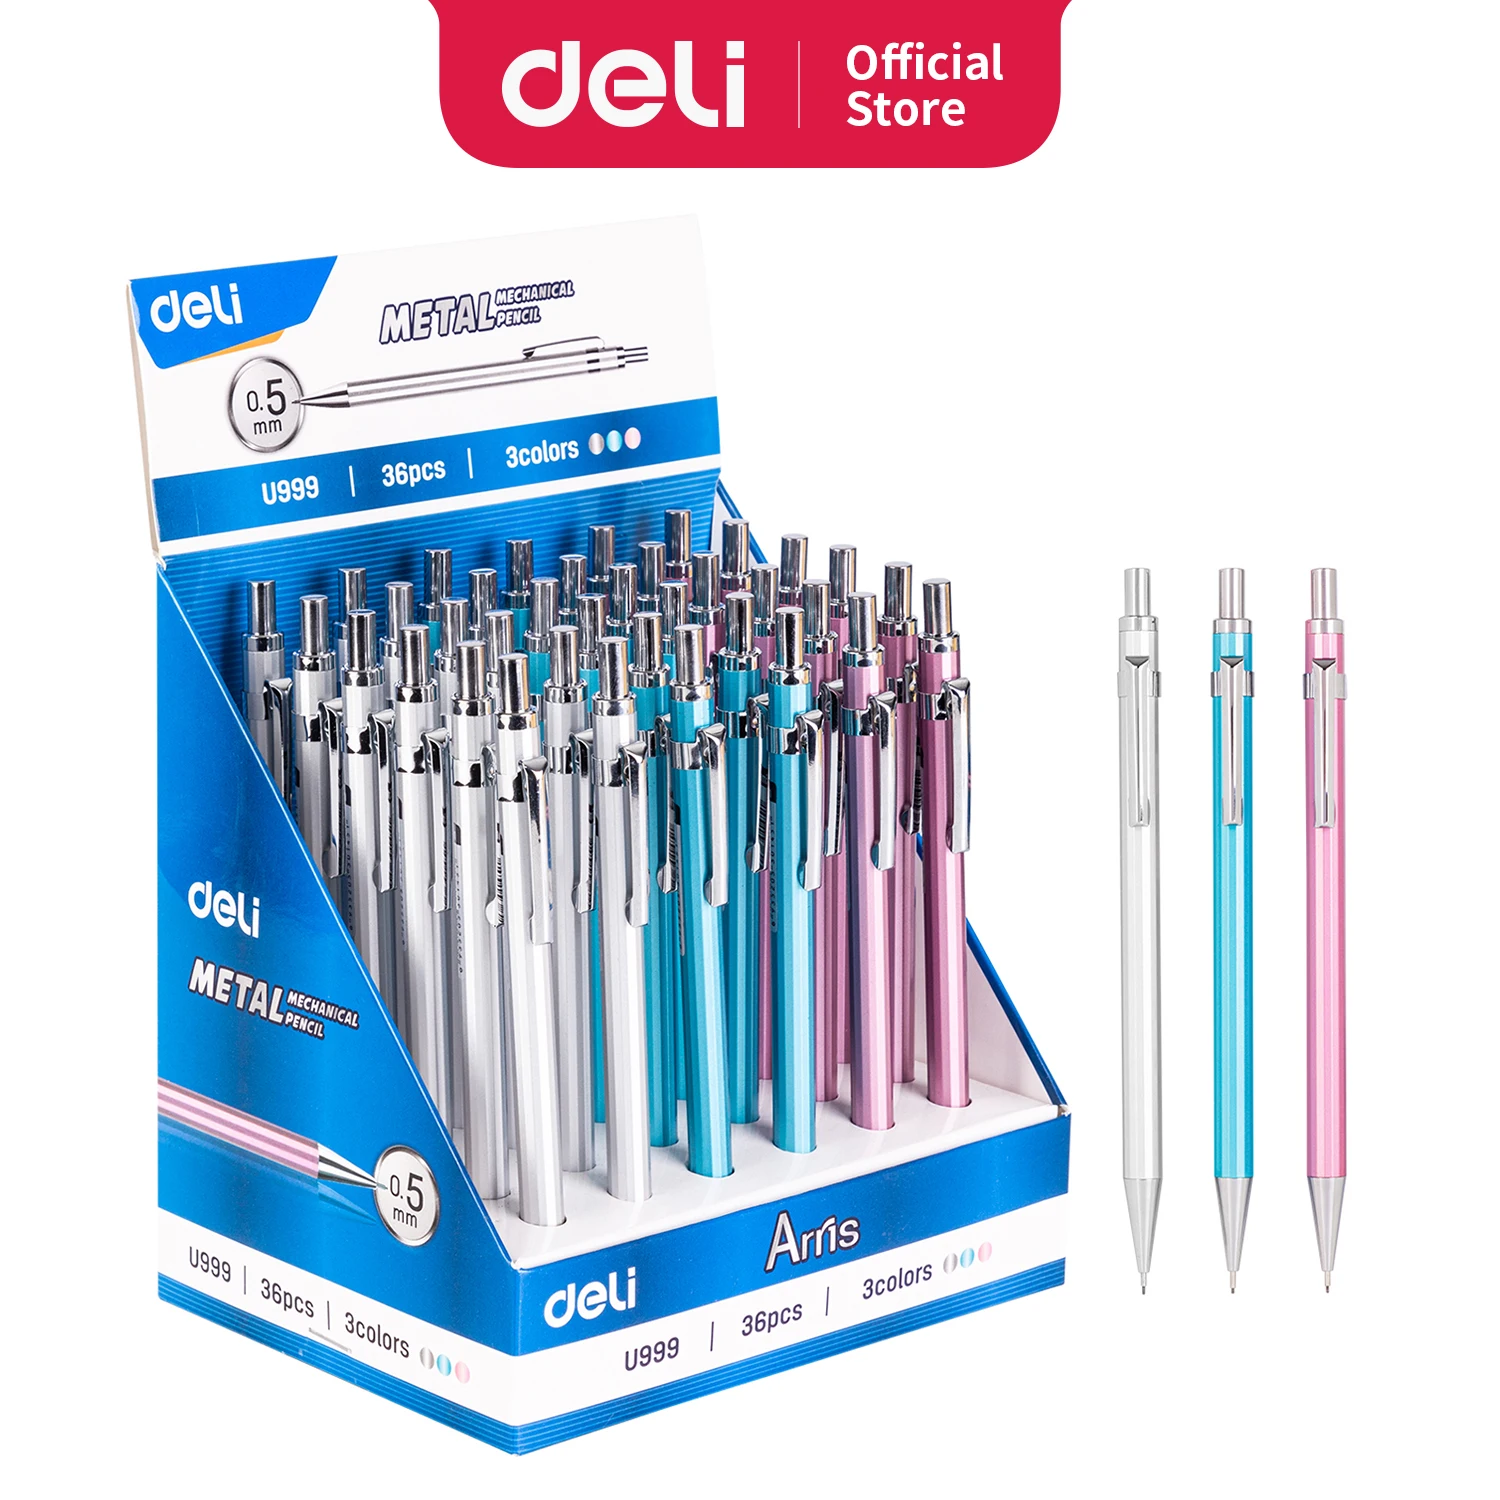 Deli Metal Mechanical Pencil 0.5mm 0.7mm with Lead Retractable Black Lead Pencils Stationery School Supplies Art Sketch Writing deli 24 36 48 colors solid watercolor set pigment art supplies acuarelas professional watercolors paints drawing with brush